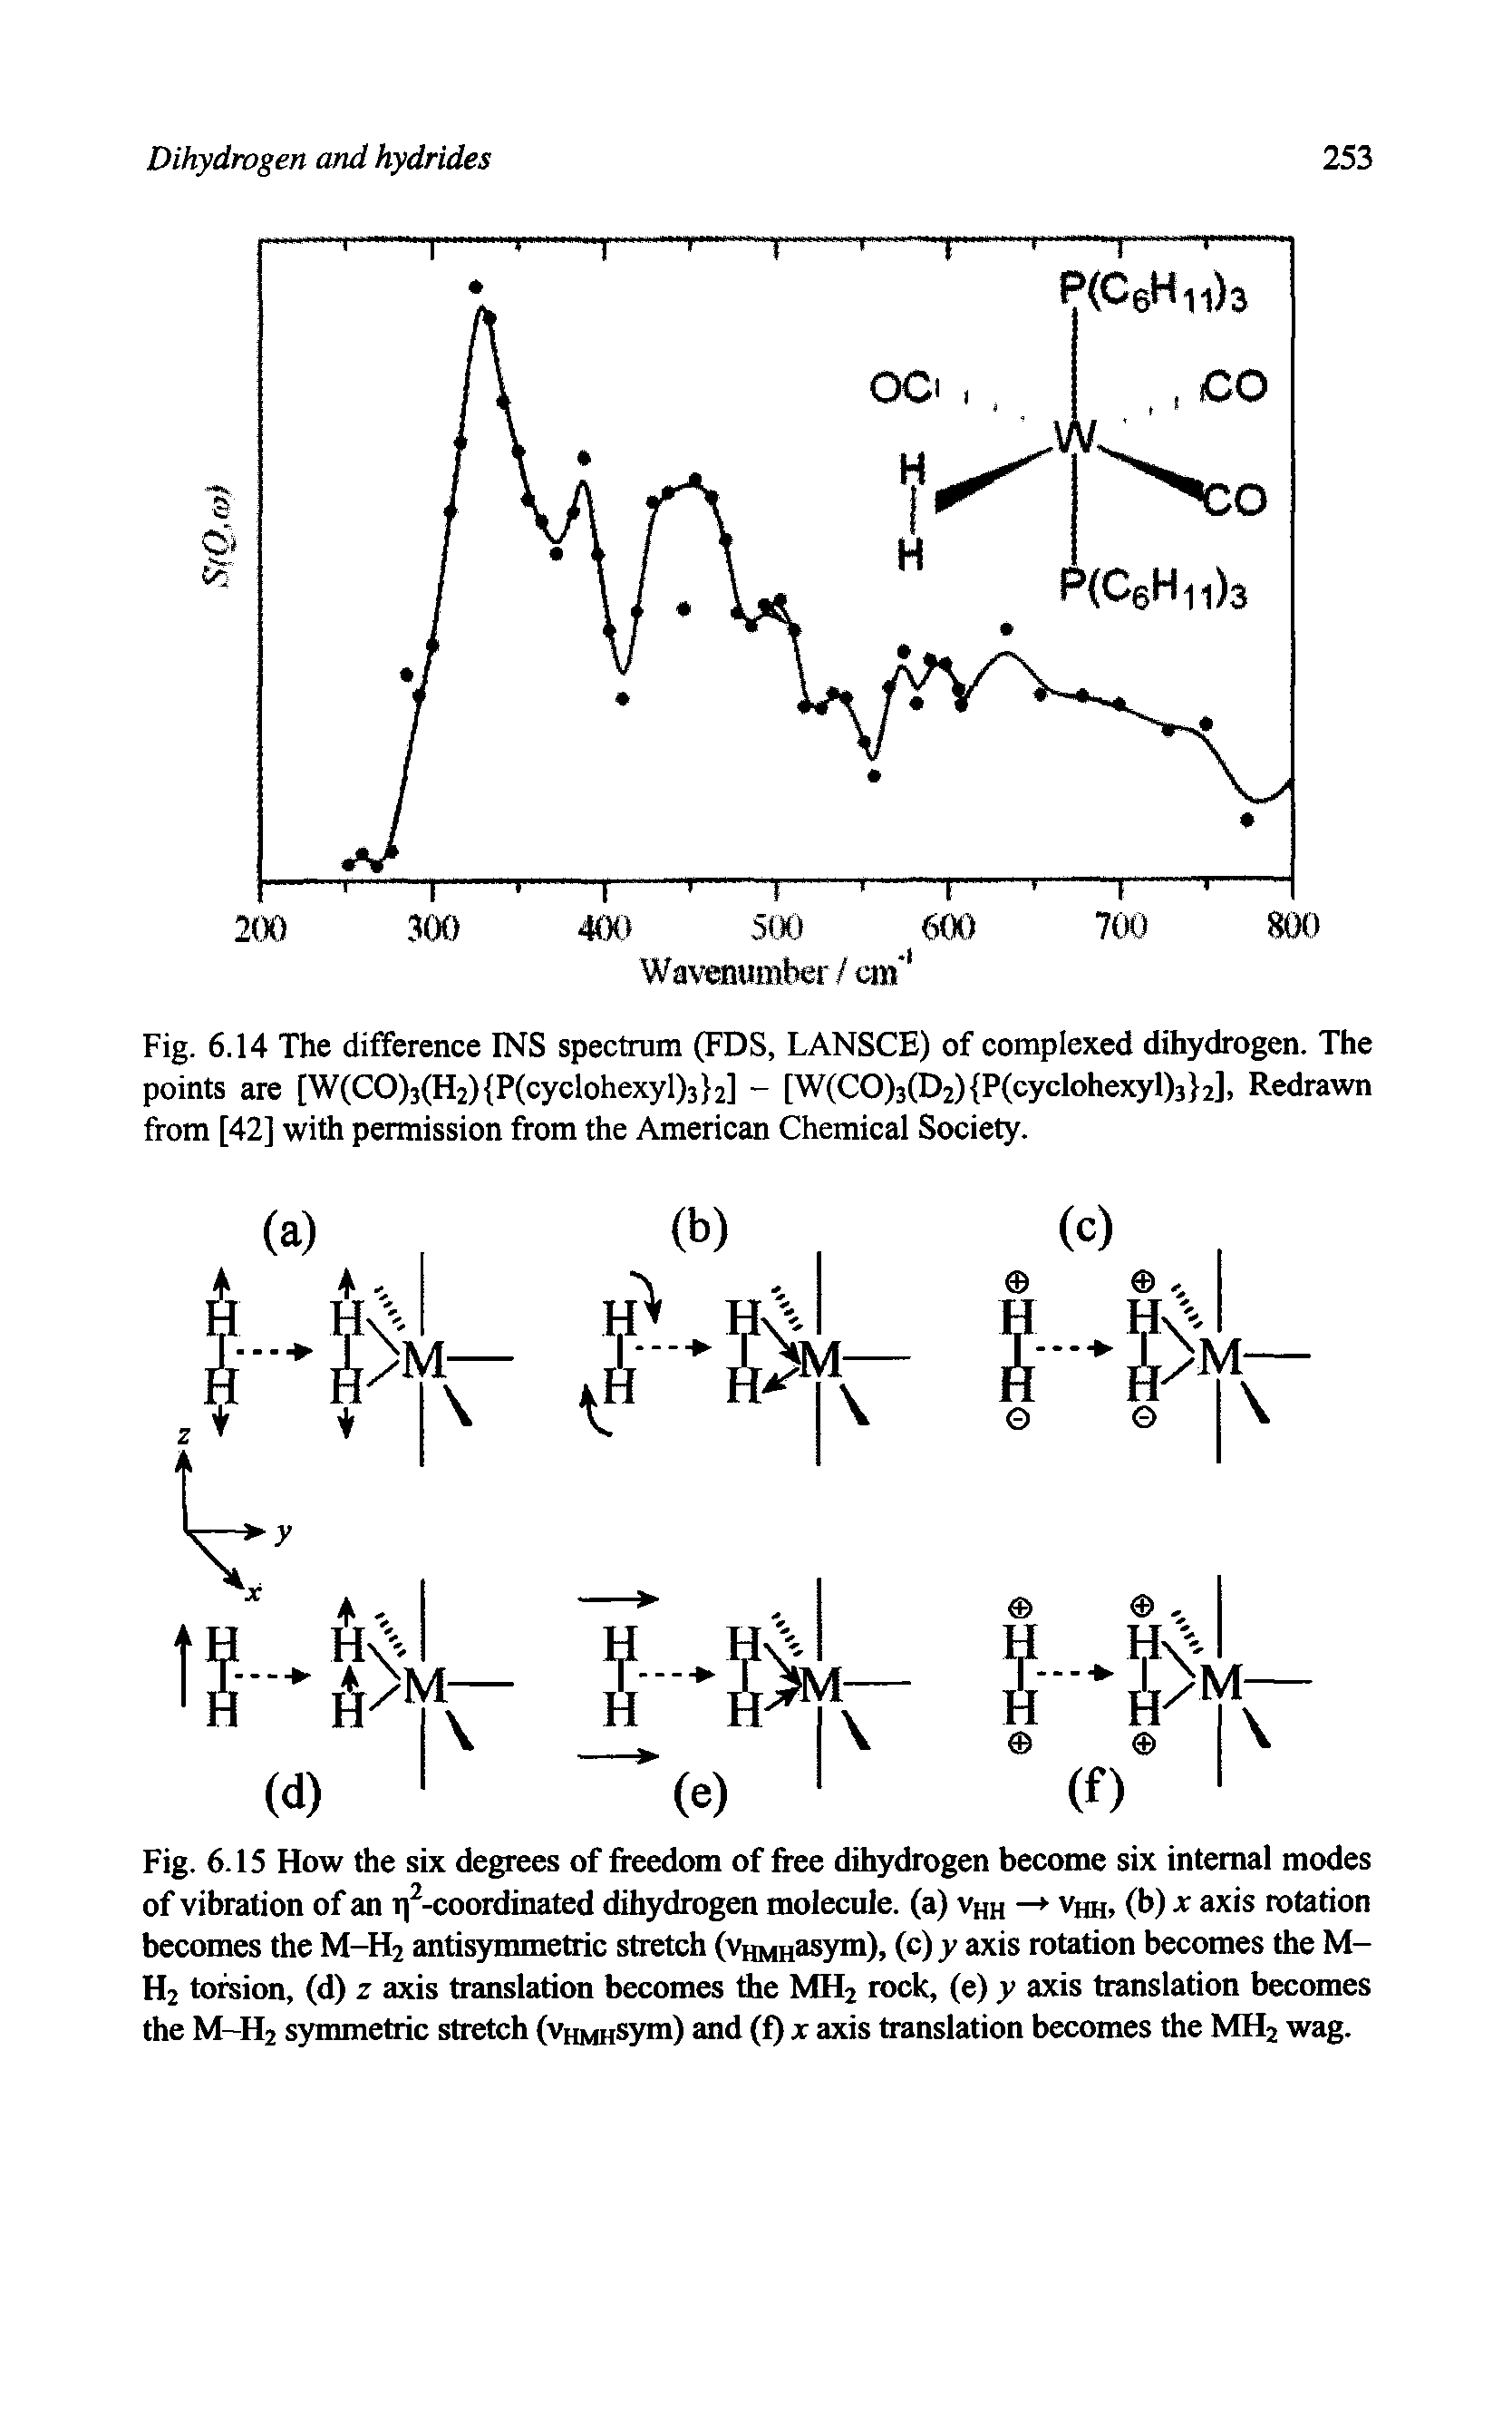 Fig. 6.14 The difference INS spectrum (FDS, LANSCE) of complexed dihydrogen. The points are [W(CO)3(H2) P(cyclohexyl)3 2] - [W(CO)3(D2) P(cyclohexyl)3 2], Redrawn from [42] with permission from the American Chemical Society.